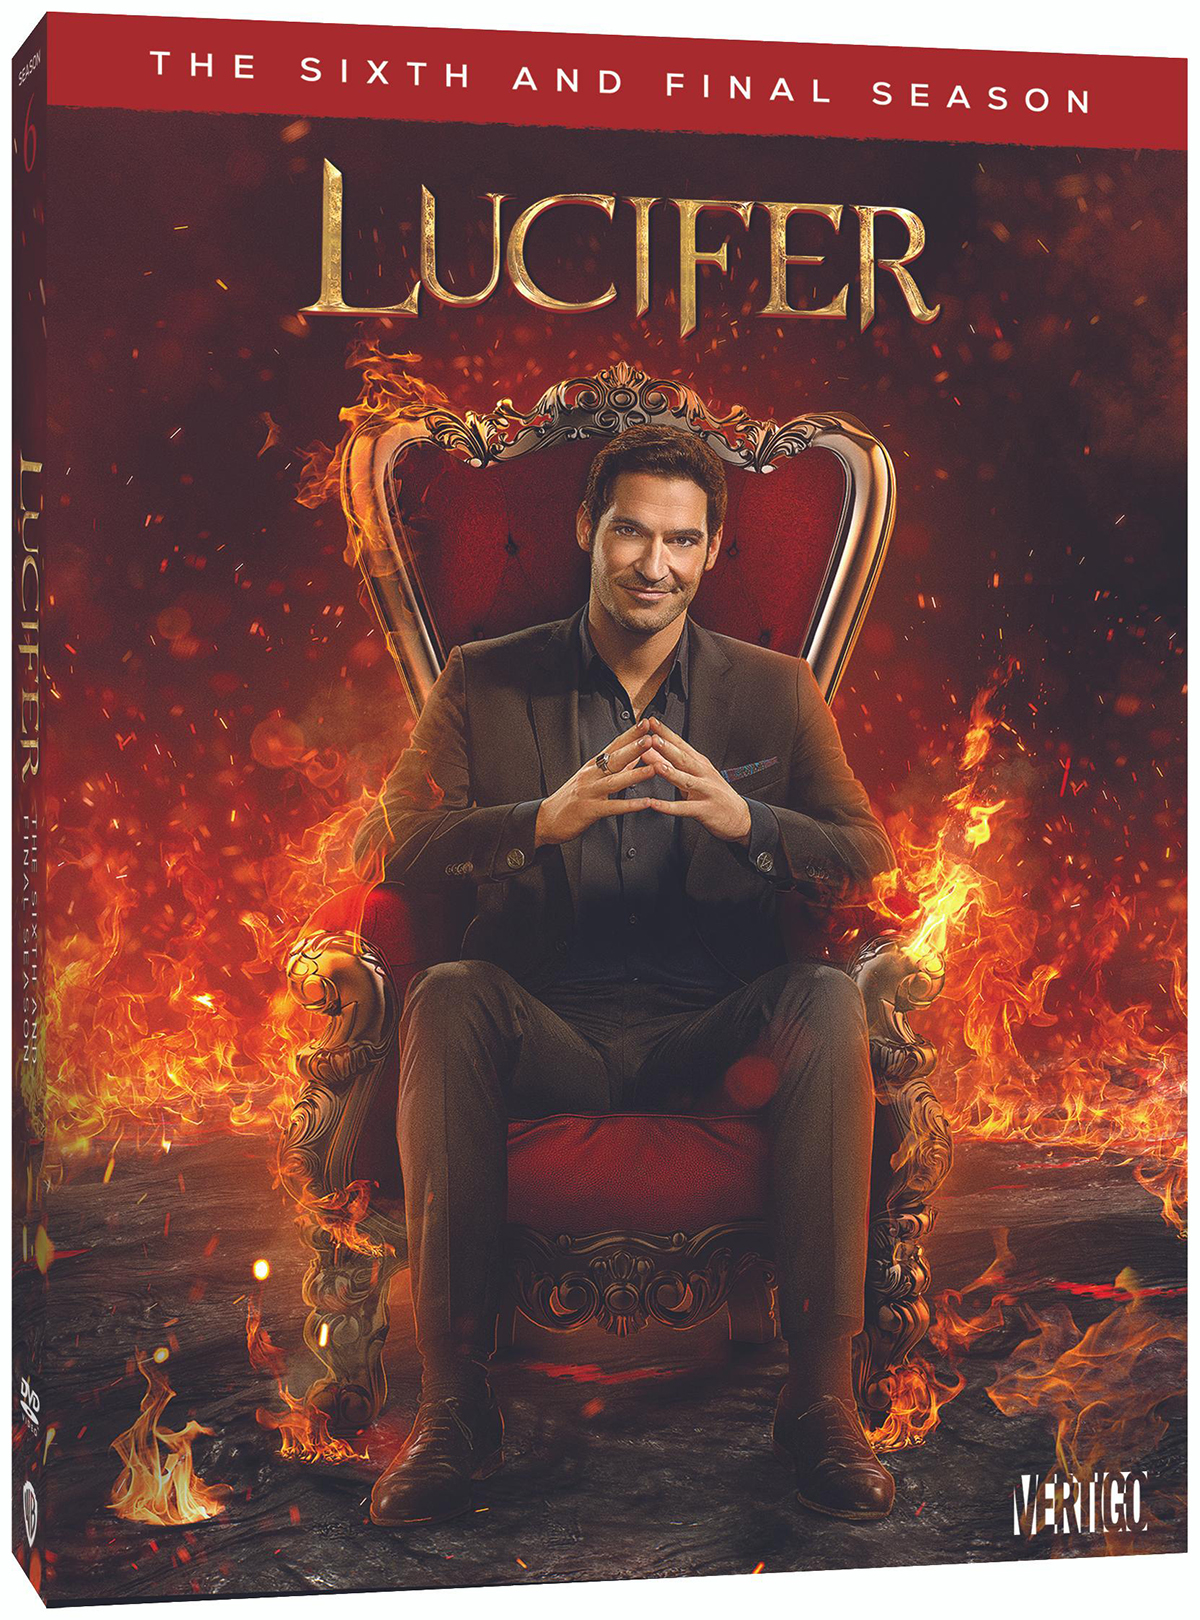 Lucifer: The Sixth & Final Season - The Hell-Raising DVD Releases September 13th